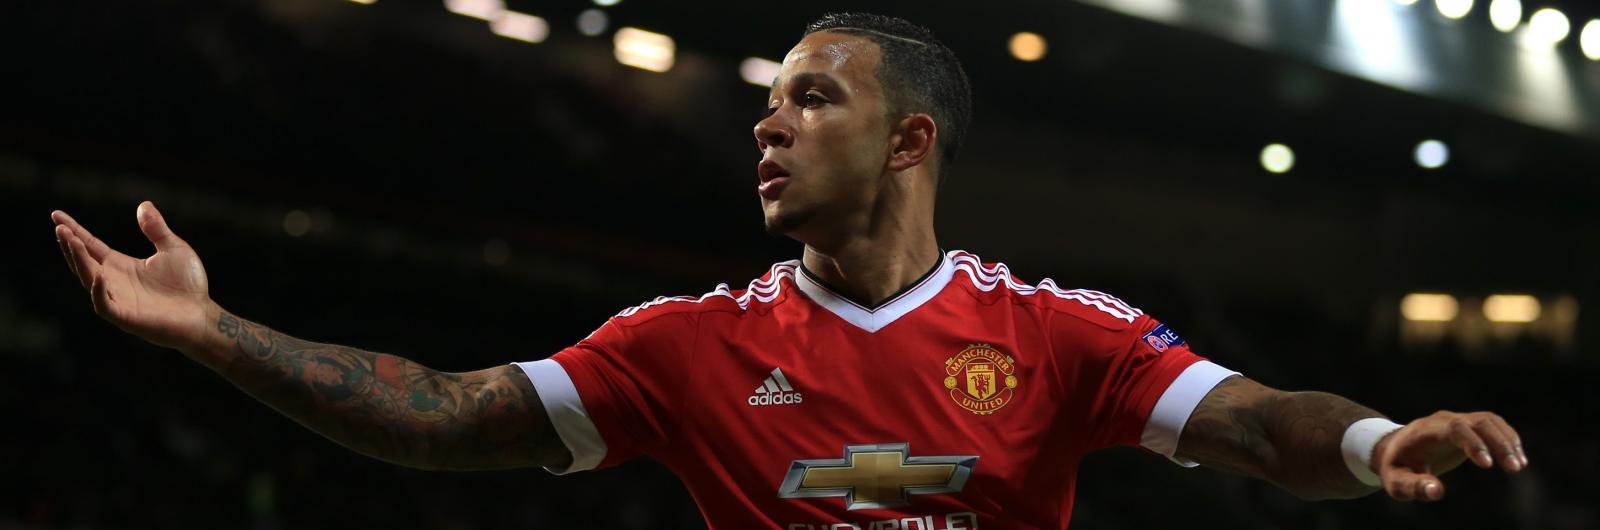 Manchester United’s £25m flop attracting interest from 3 European outfits